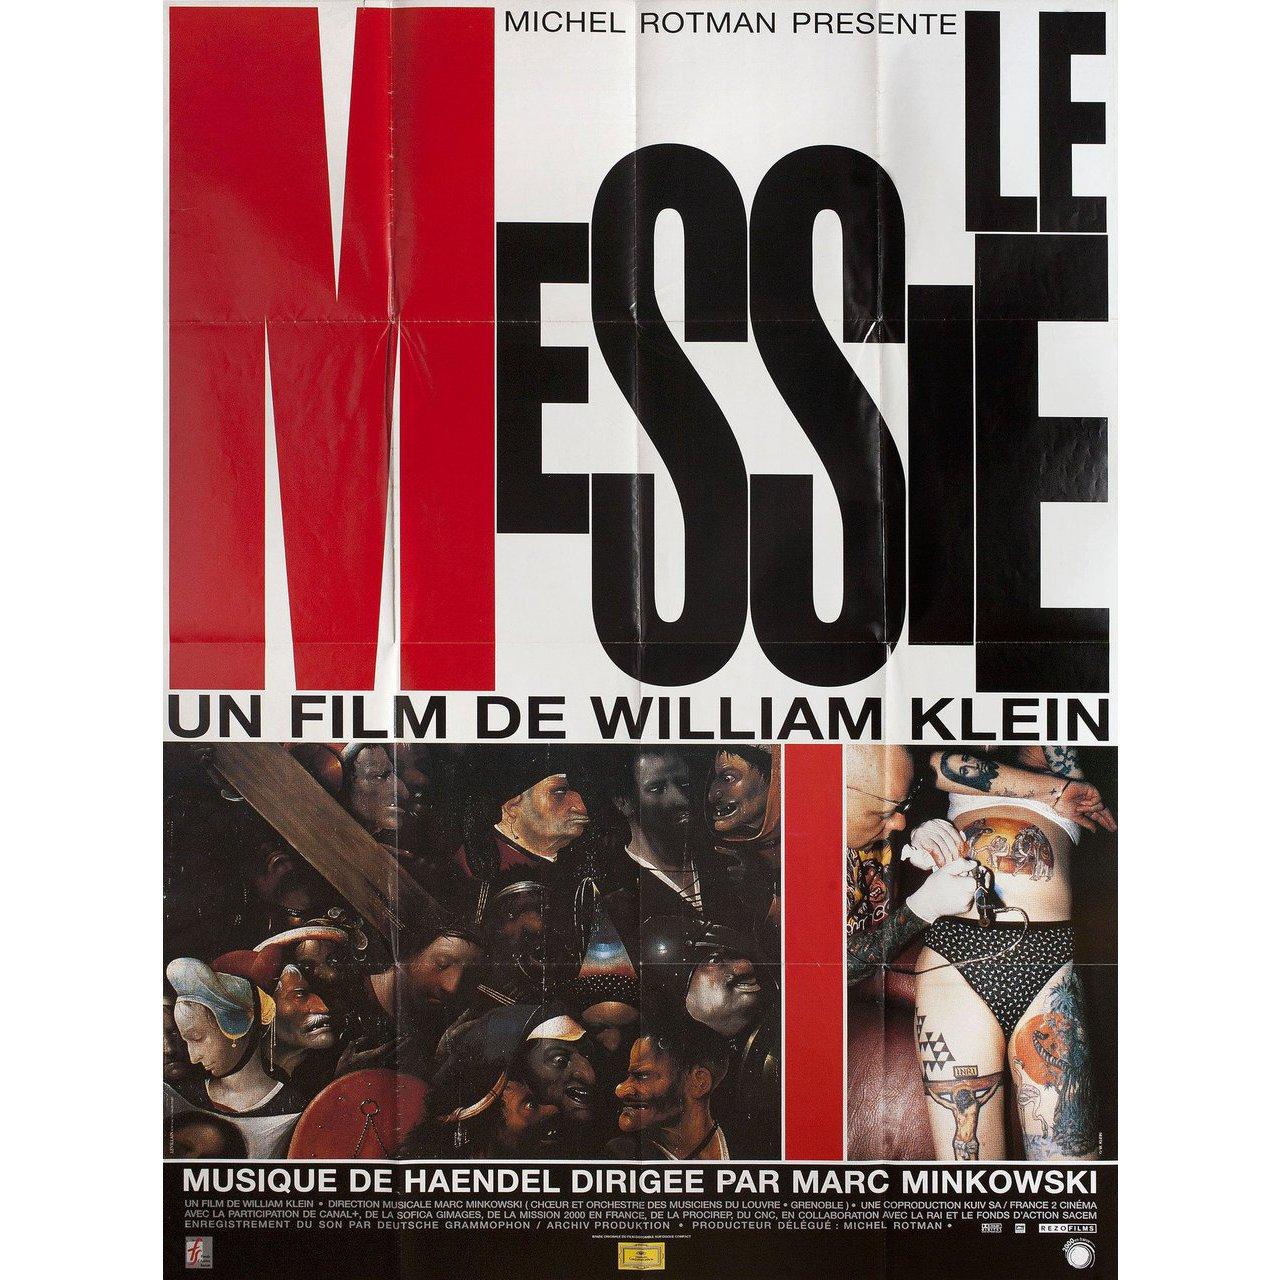 Original 1999 French grande poster by William Klein for the documentary film Messiah directed by William Klein with Charlotte Hellekant / Lynne Dawson / Nicole Heaston / Magdalena Kozena. Very good-fine condition, folded. Many original posters were